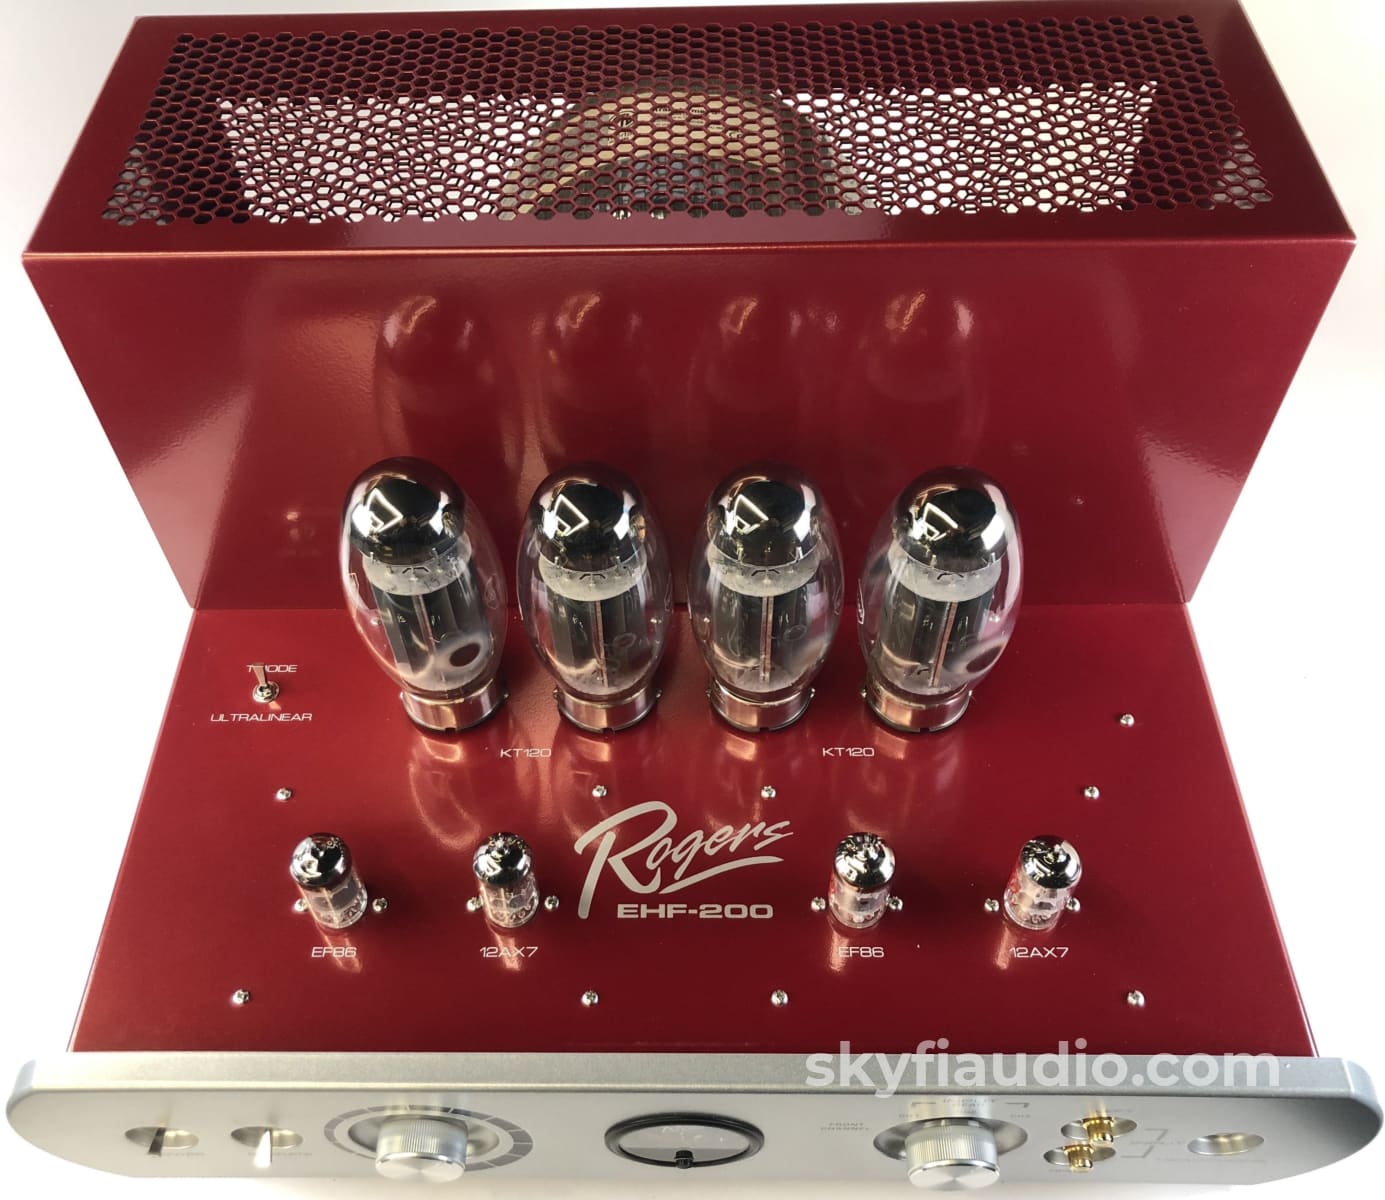 Rogers High Fidelity Ehf-200 Class-A Tube Integrated Amplifier - Lifetime Warranty Made In The Usa